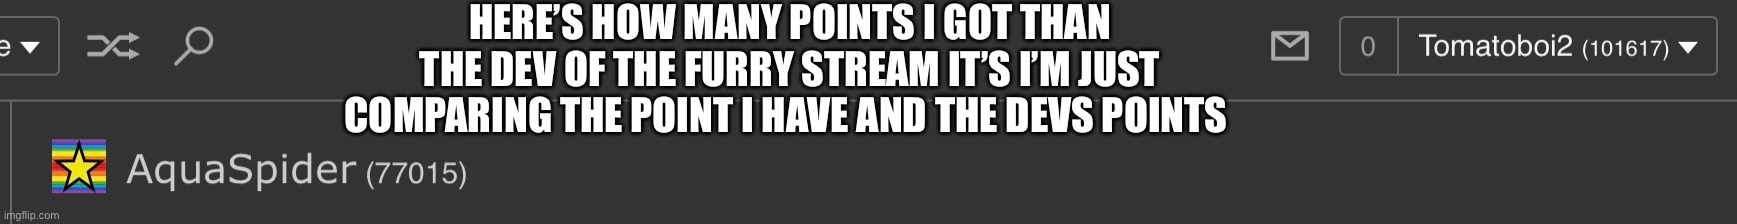 Just comparing that's all I’m not bragging | HERE’S HOW MANY POINTS I GOT THAN THE DEV OF THE FURRY STREAM IT’S I’M JUST COMPARING THE POINT I HAVE AND THE DEVS POINTS | image tagged in okay | made w/ Imgflip meme maker